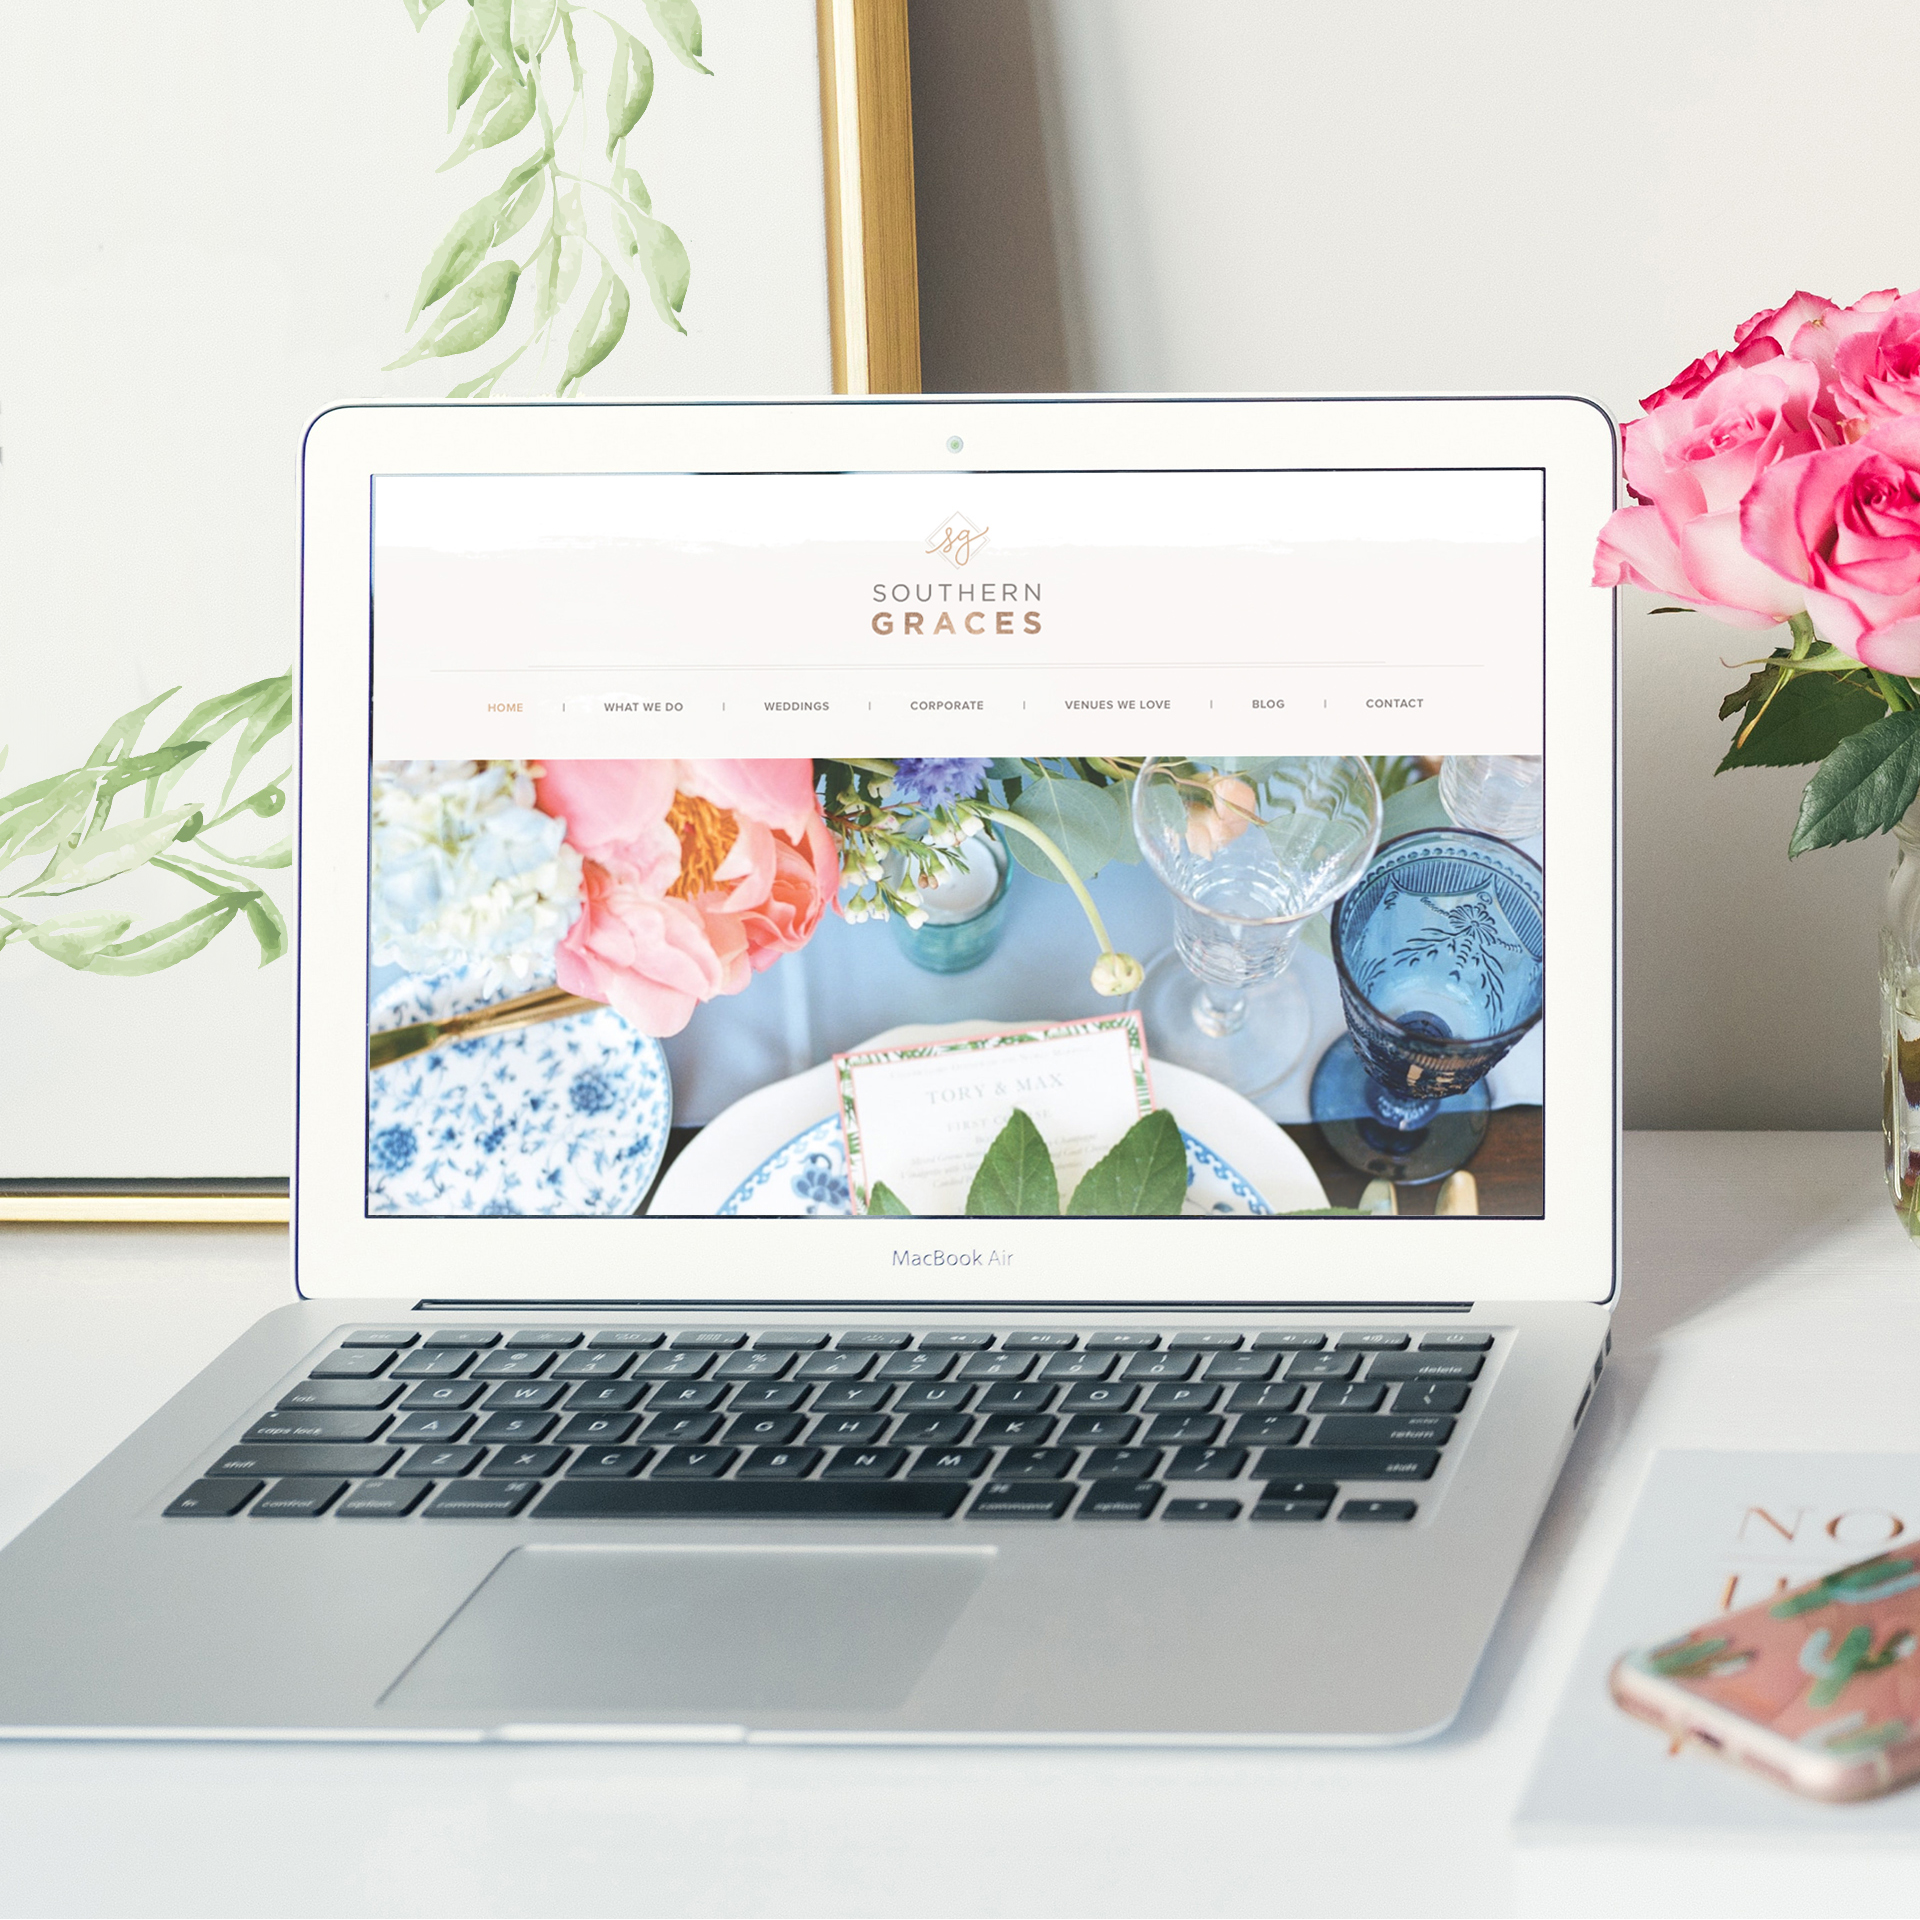 Southern Graces new website displayed on a laptop computer